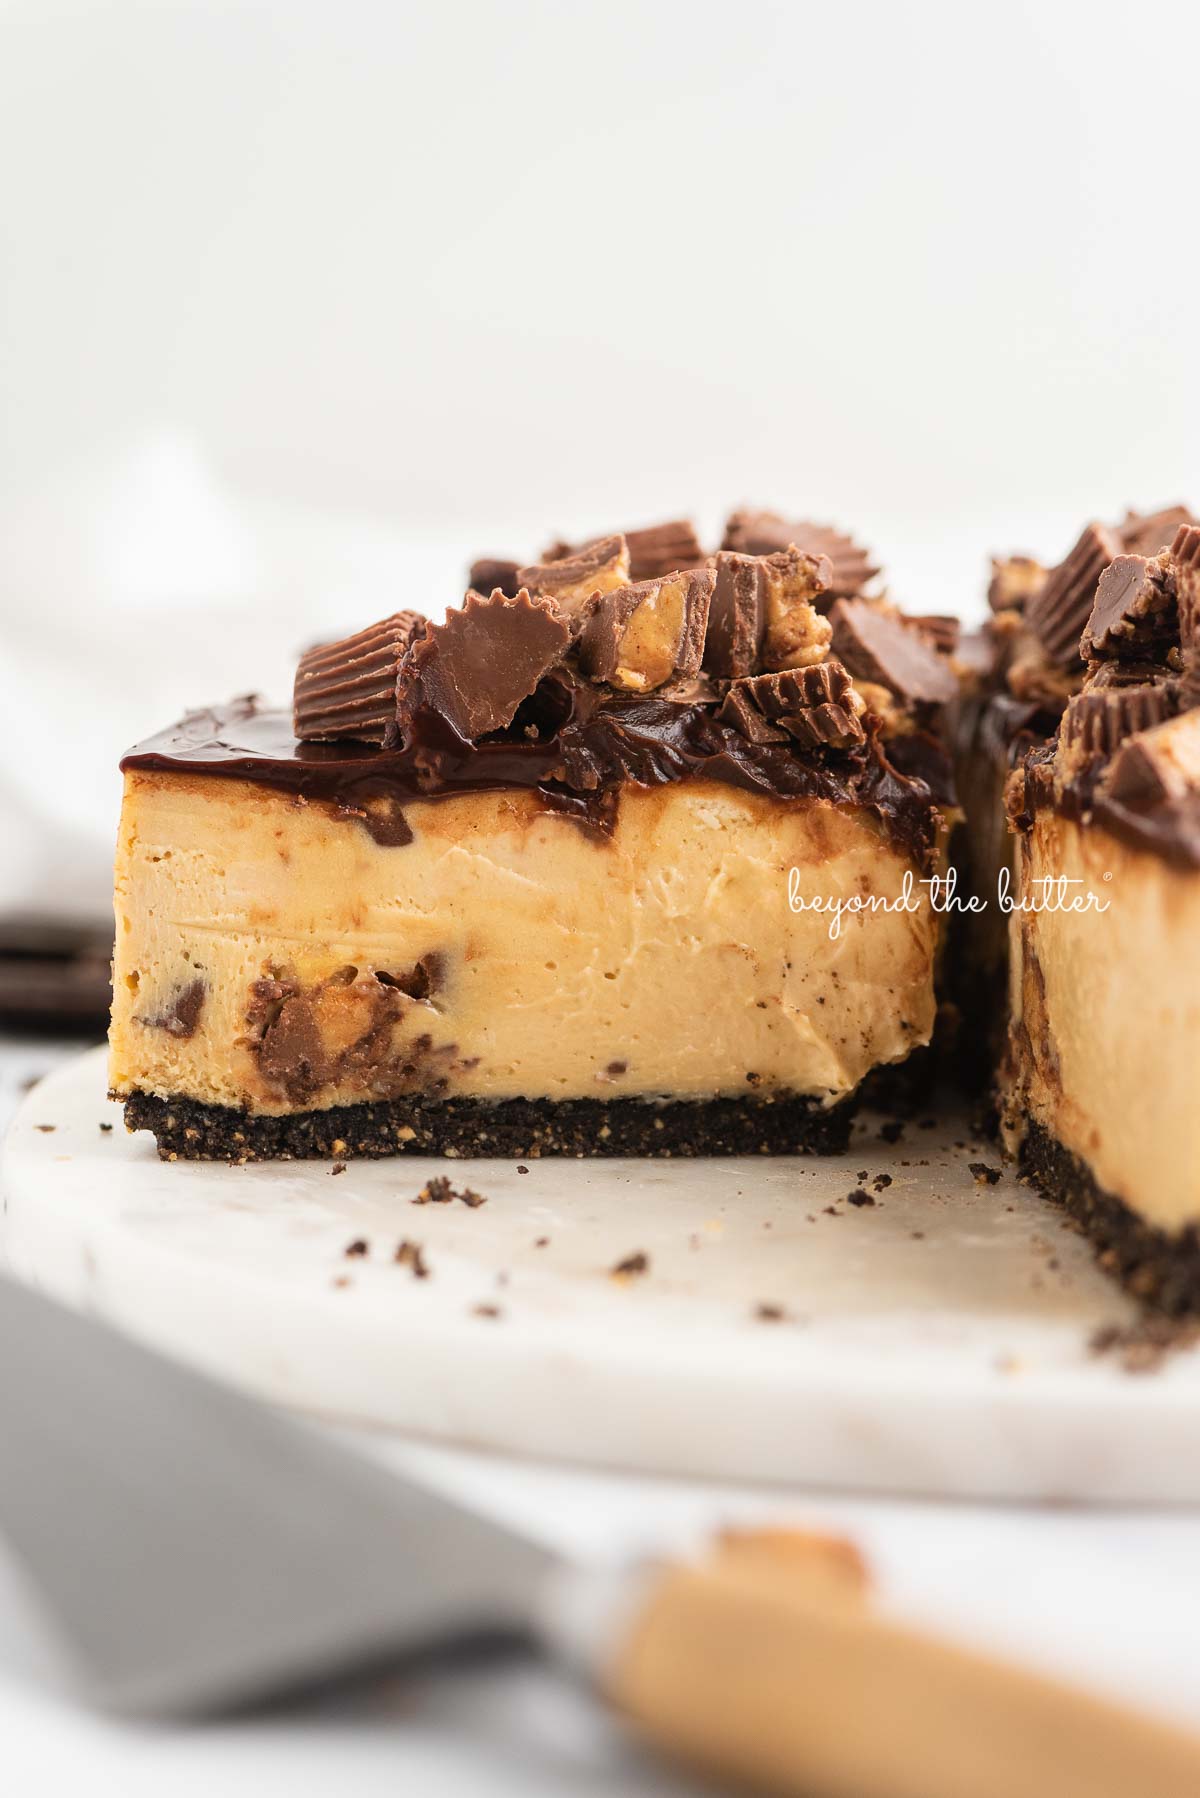 Side view of Reese's peanut butter cup cheesecake topped with chocolate ganache and chopped mini Reese's cups.